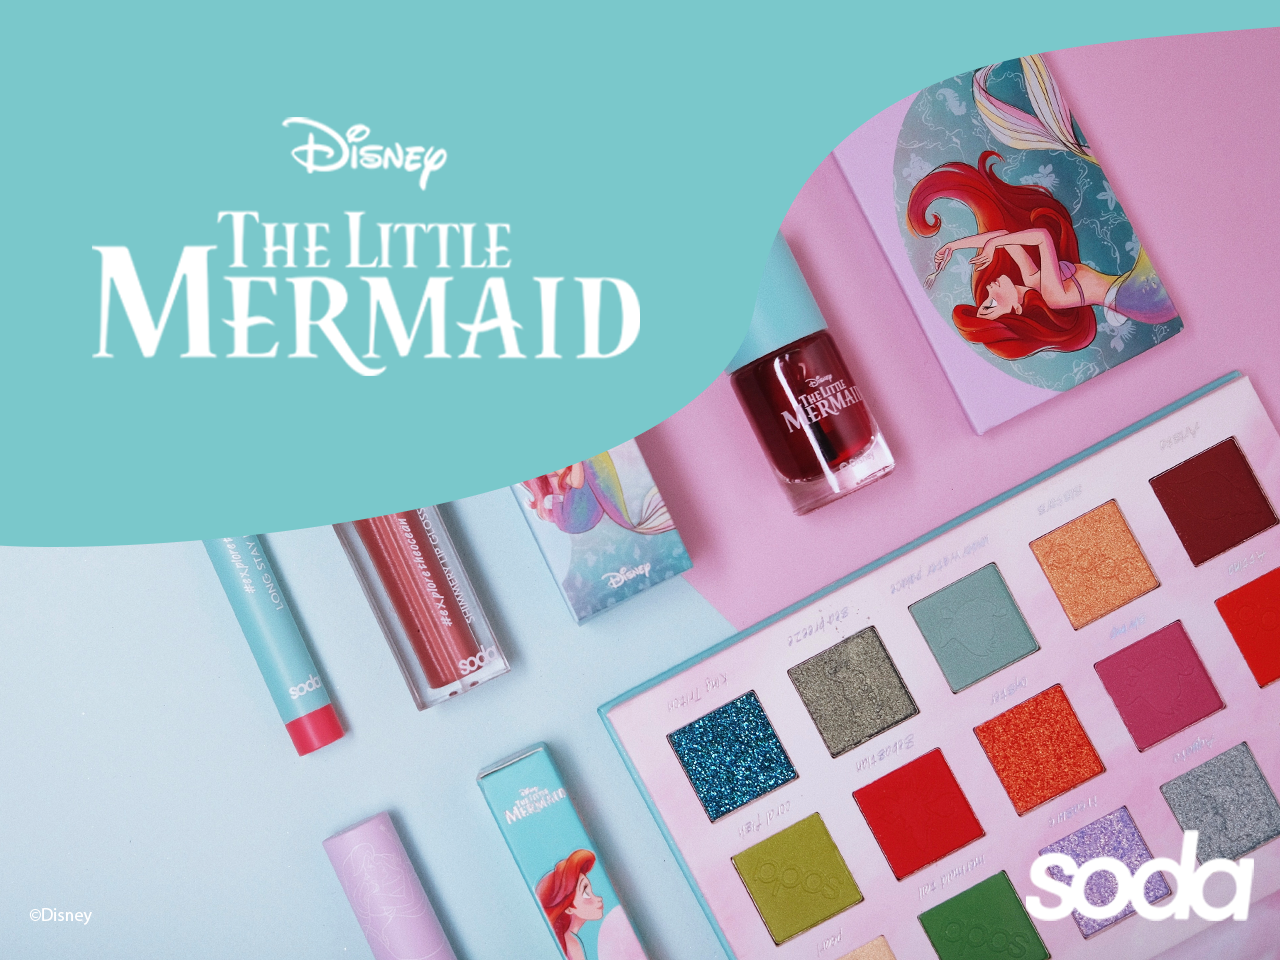 SODA Makeup reveals collaboration with Disney’s The Little Mermaid